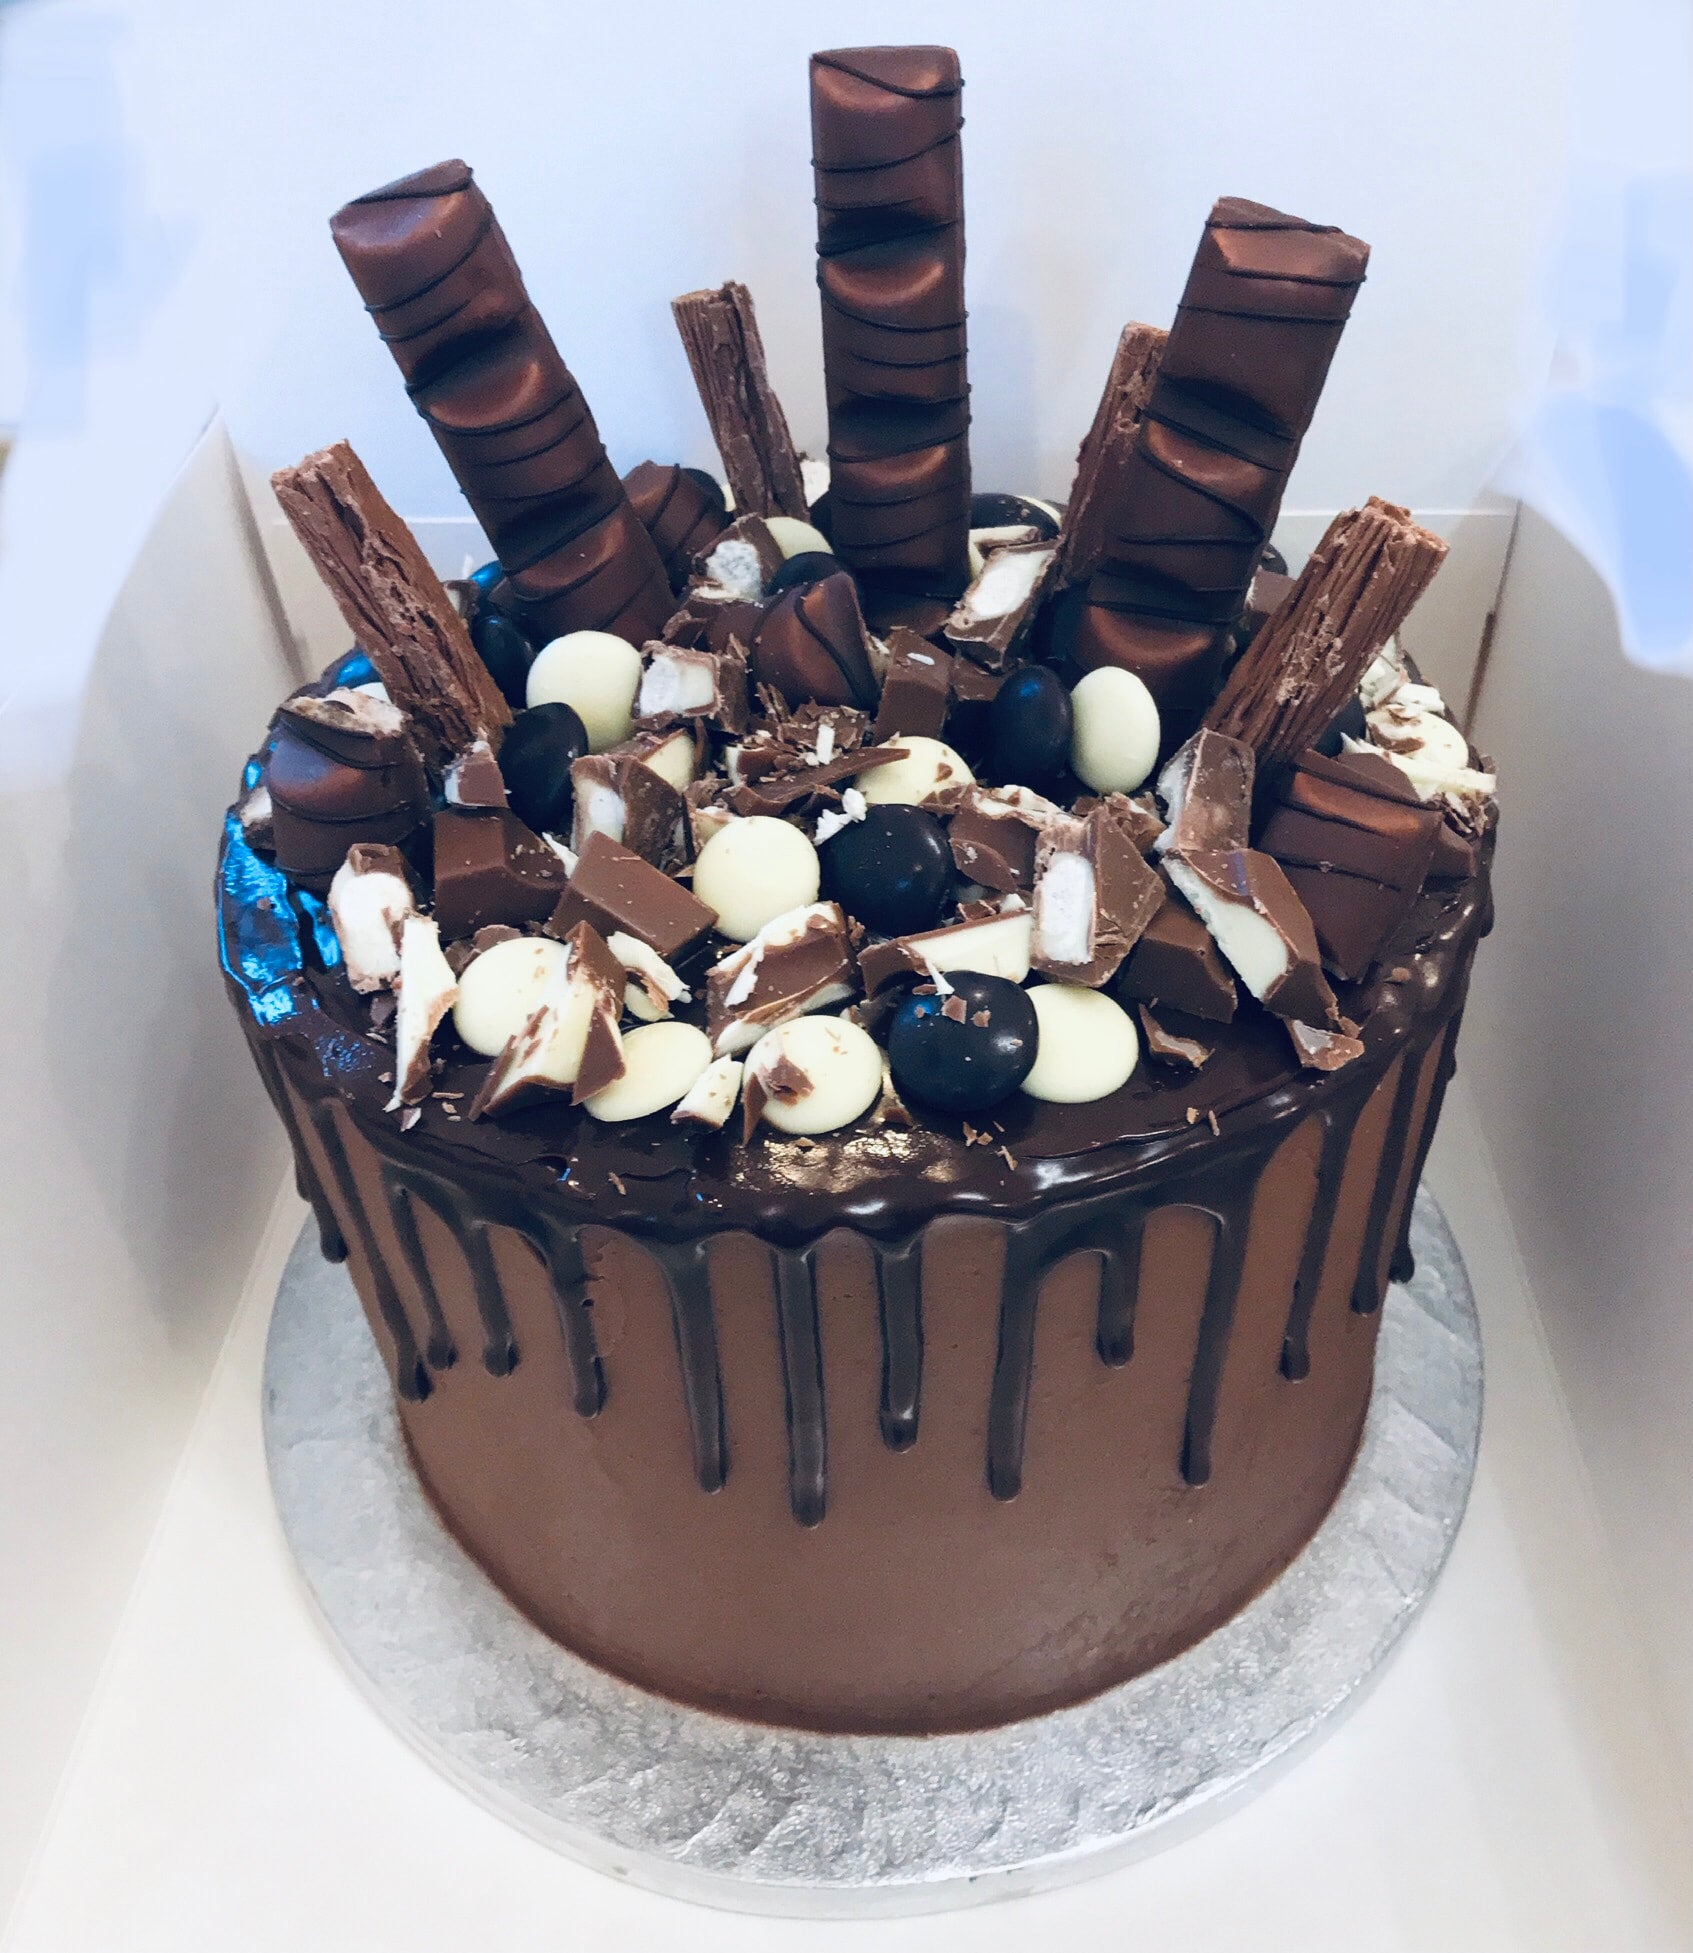 Chocolate explosion cake for a friend's birthday - first time I've been  asked to make a cake for someone! : r/cakedecorating